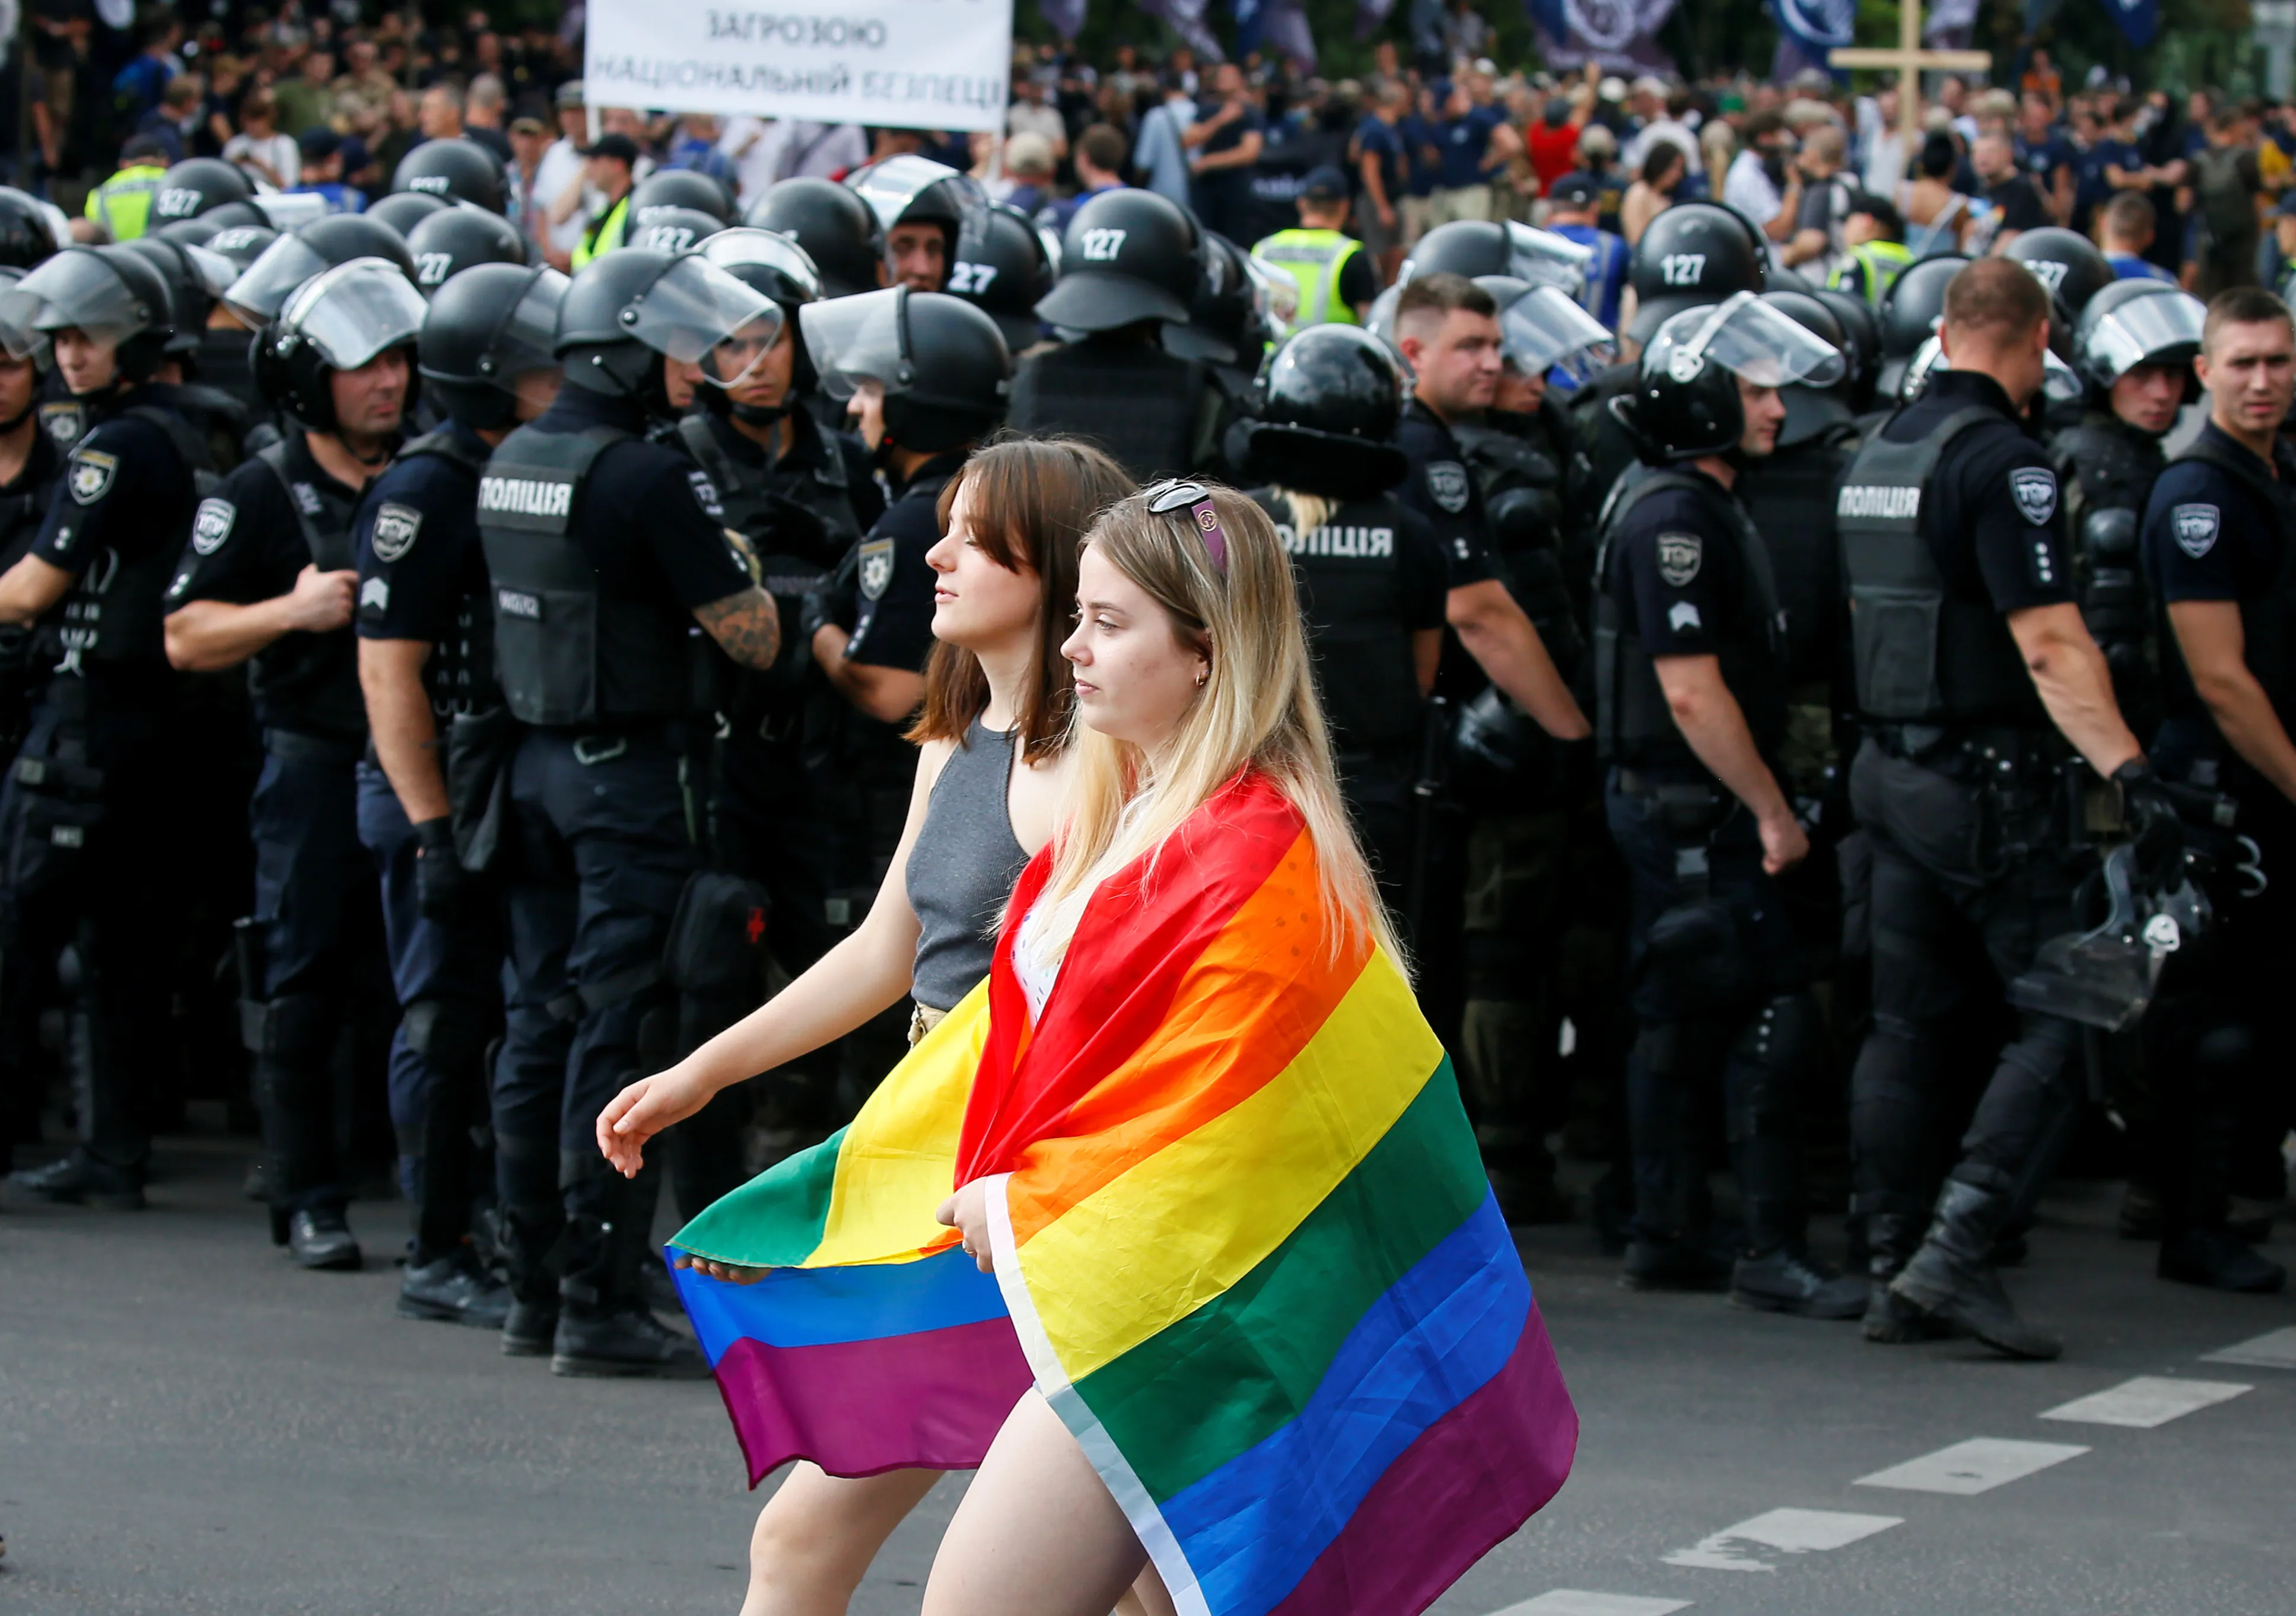 What does a Pride parade have to do with NATO? More than you might